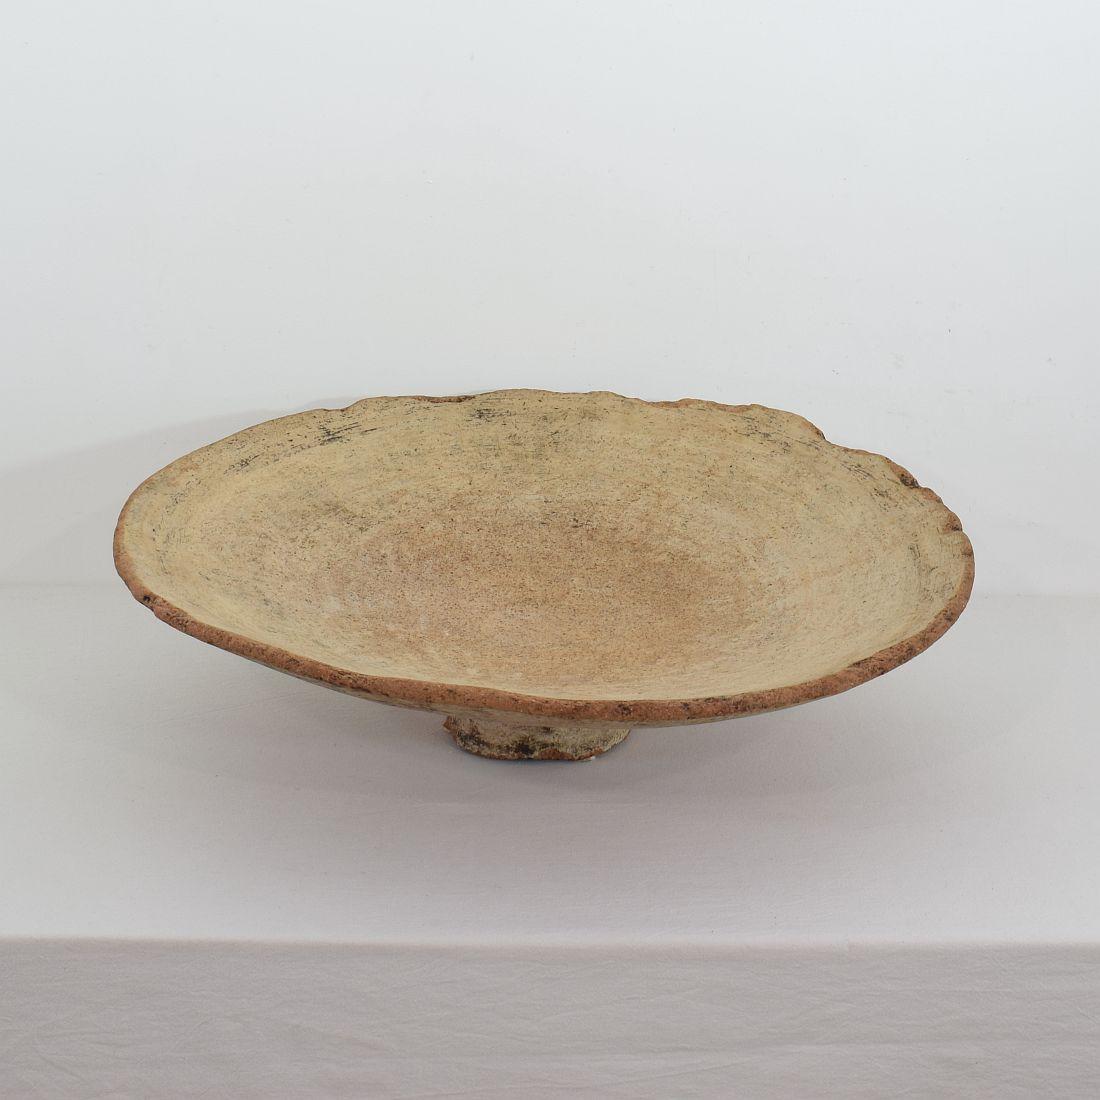 Hand-Crafted Mid-19th Century Moroccan Terracotta Couscous / Bread Bowl